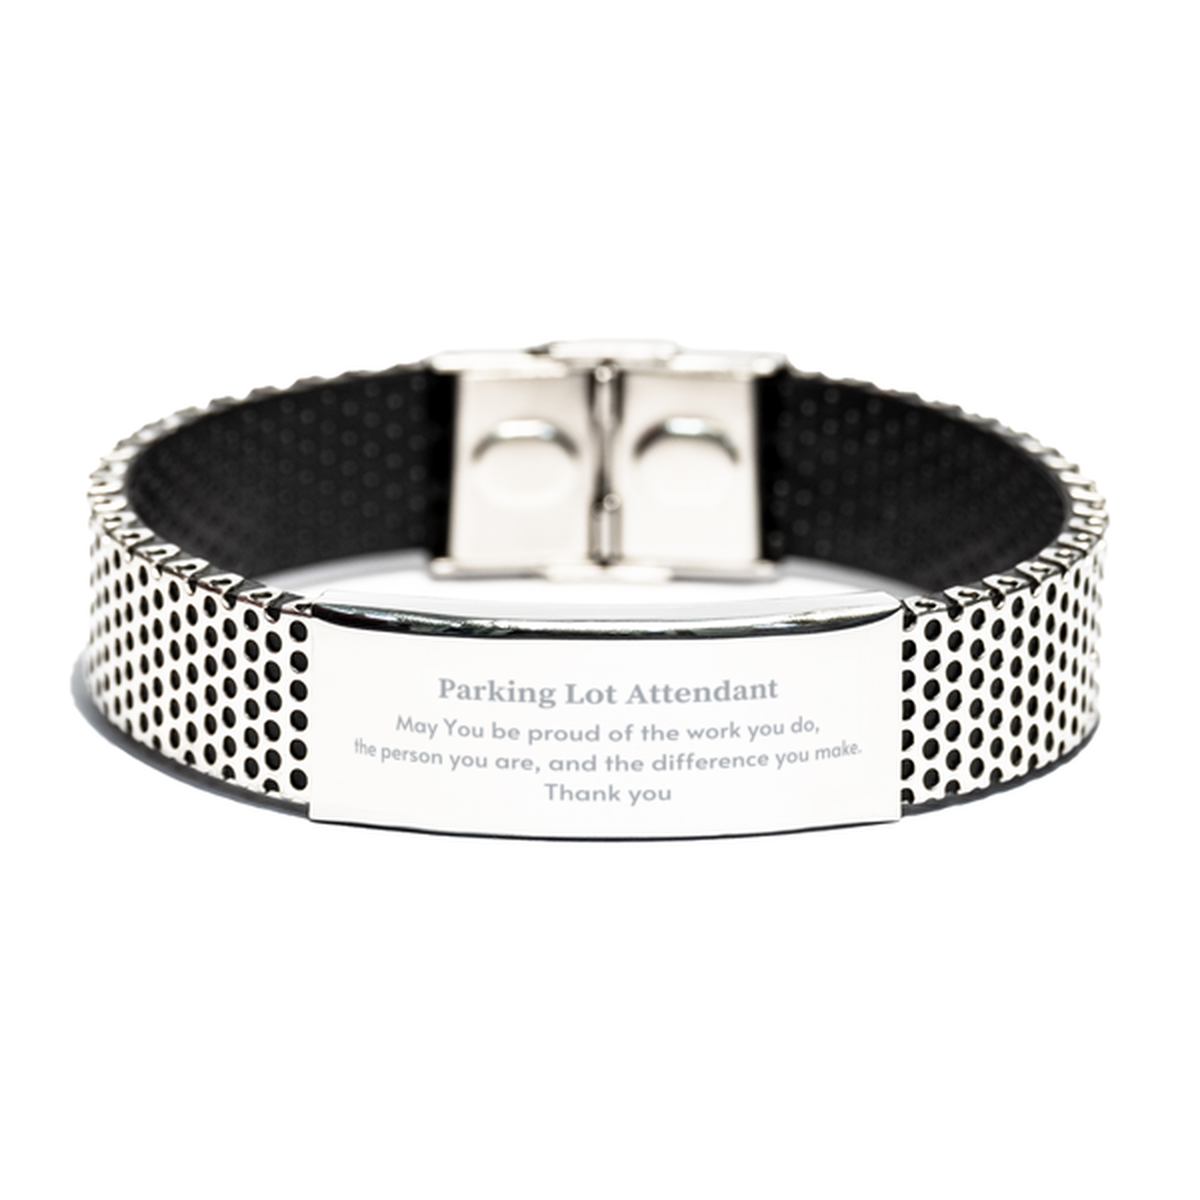 Heartwarming Stainless Steel Bracelet Retirement Coworkers Gifts for Parking Lot Attendant, Parking Lot Attendant May You be proud of the work you do, the person you are Gifts for Boss Men Women Friends